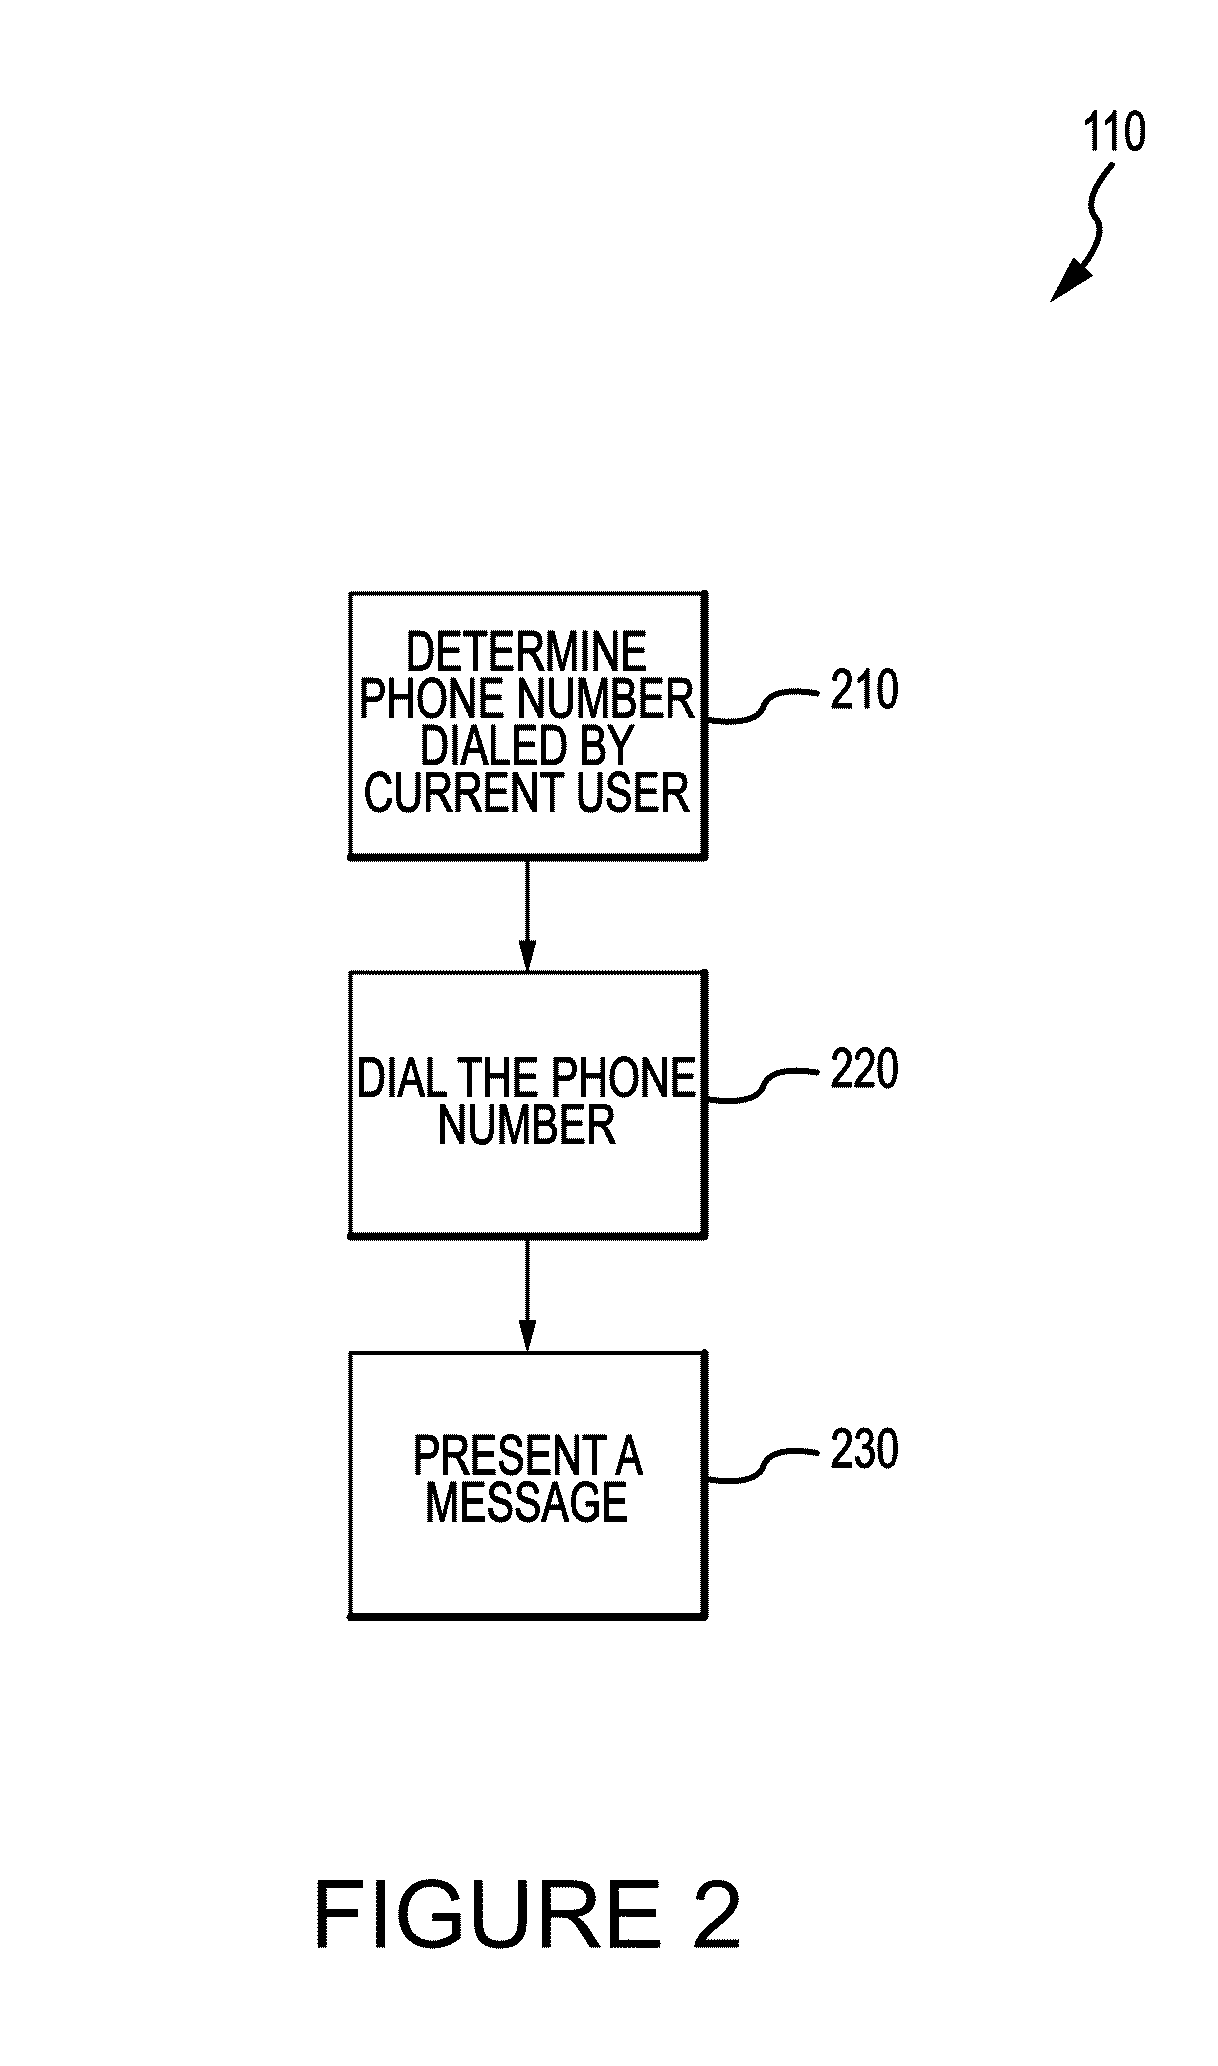 Systems and methods for dynamically assessing and mitigating risk of an insured entity